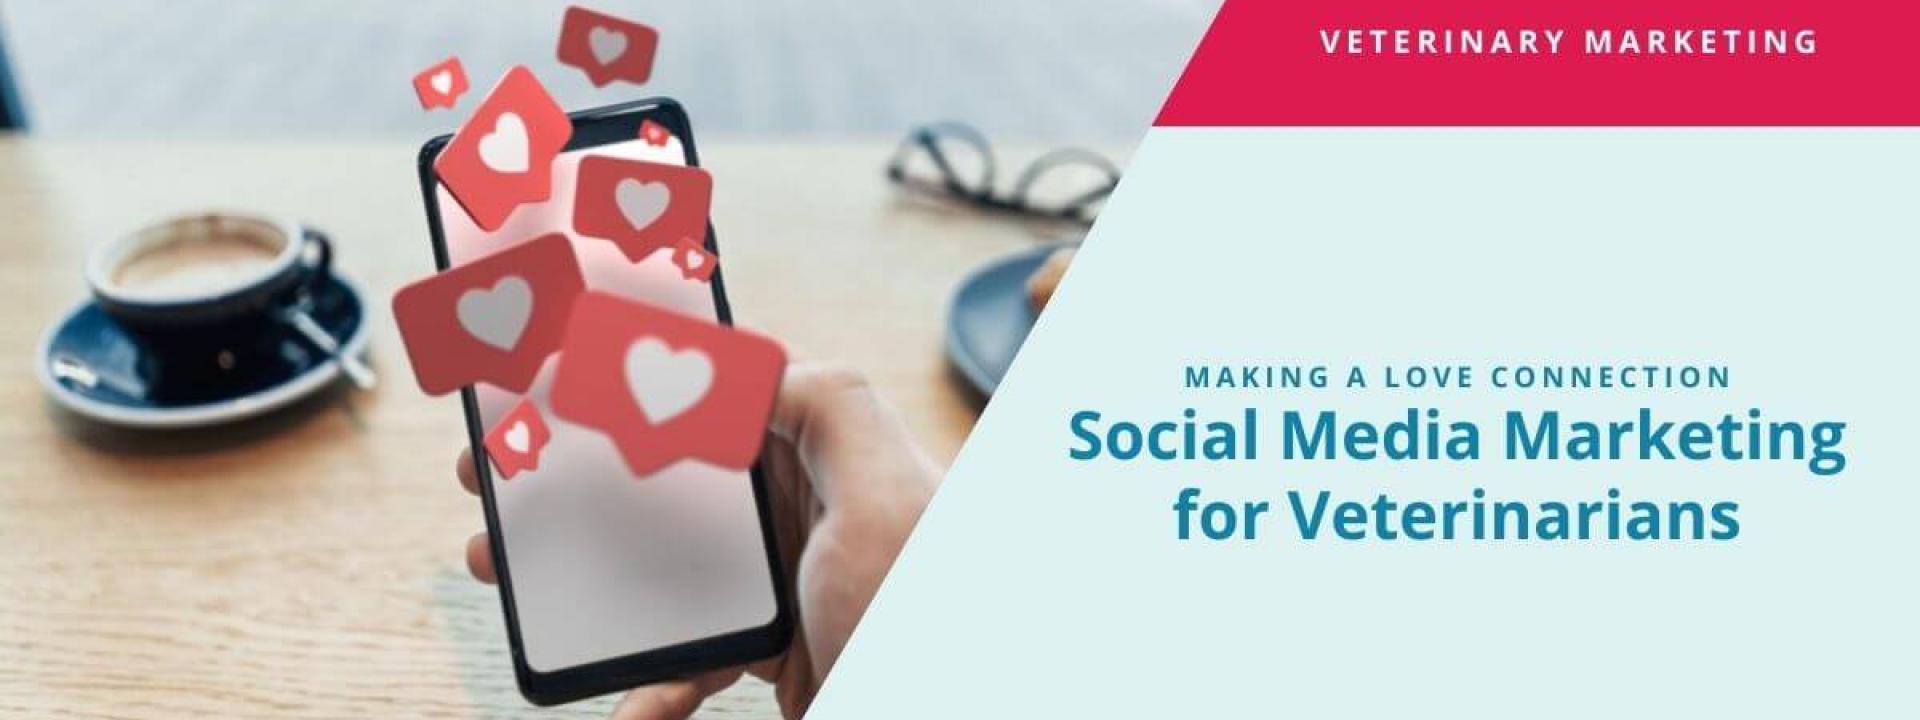 Making a Love Connection: Social Media Marketing for Veterinarians